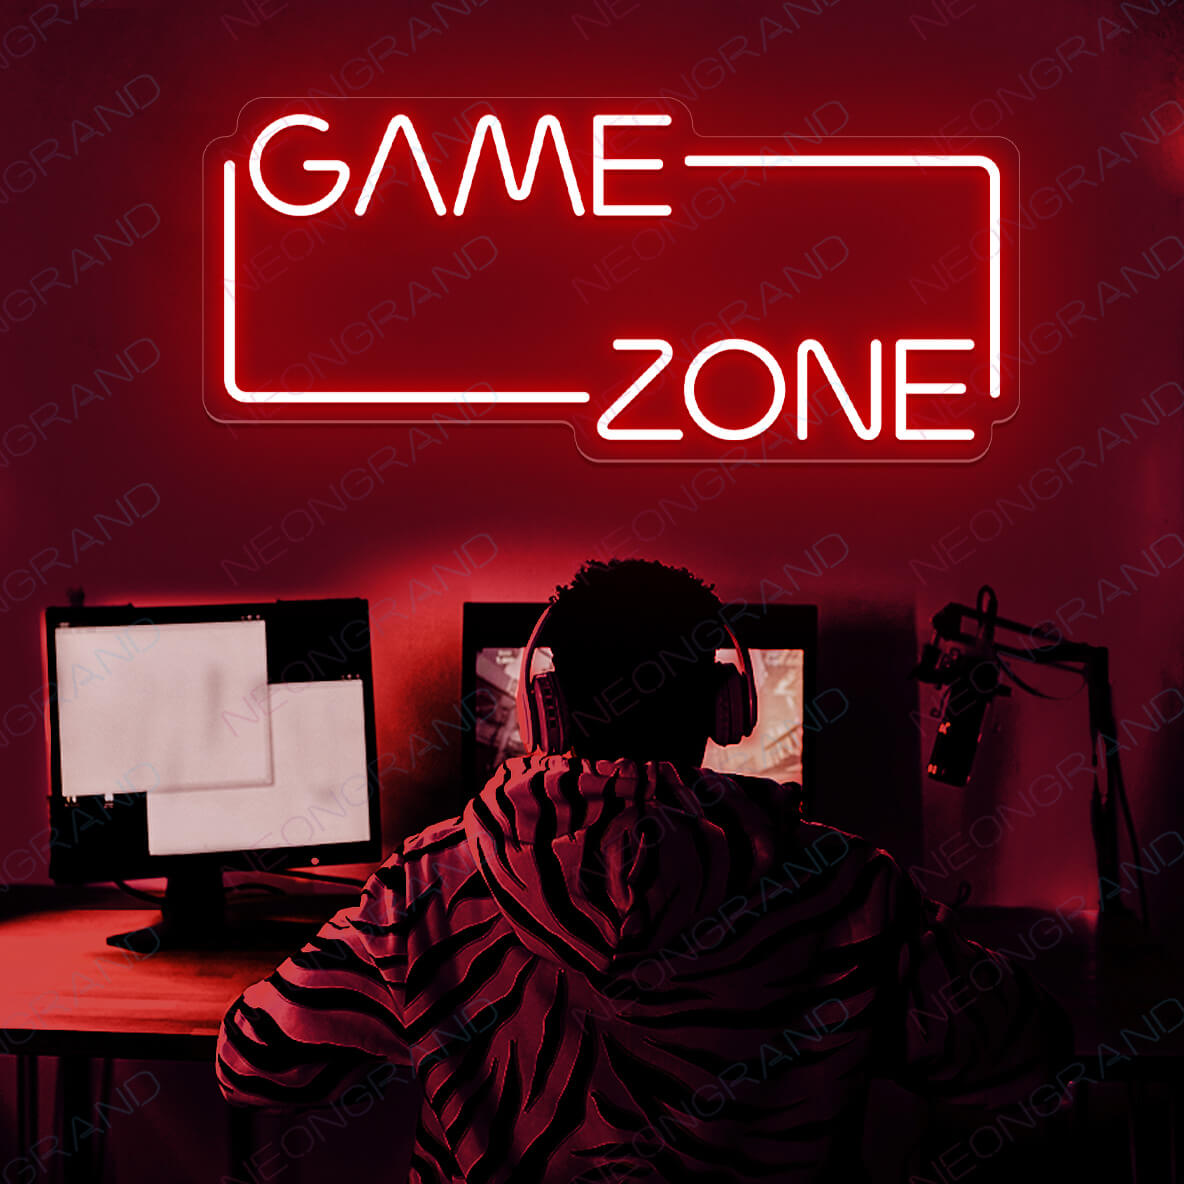 Neon Game Sign Game Zone Neon Sign Led Light red